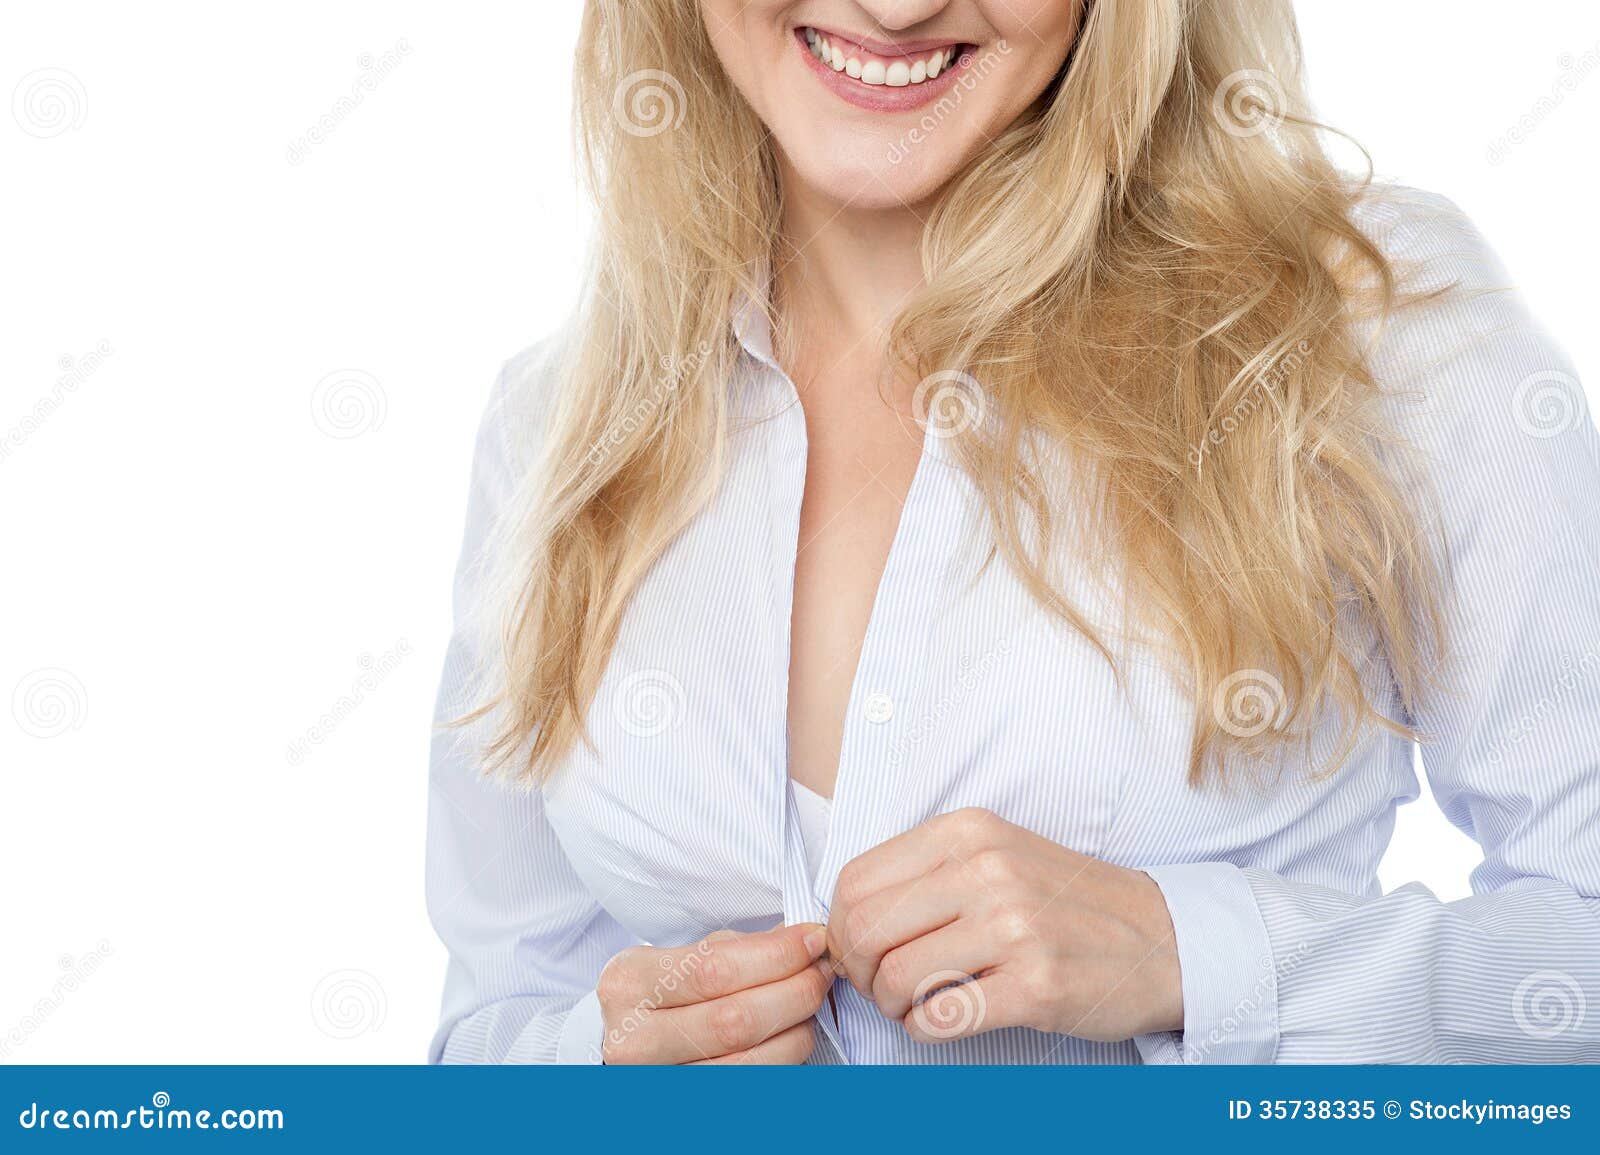 Photo about Cropped image of a woman taking off her shirt. 